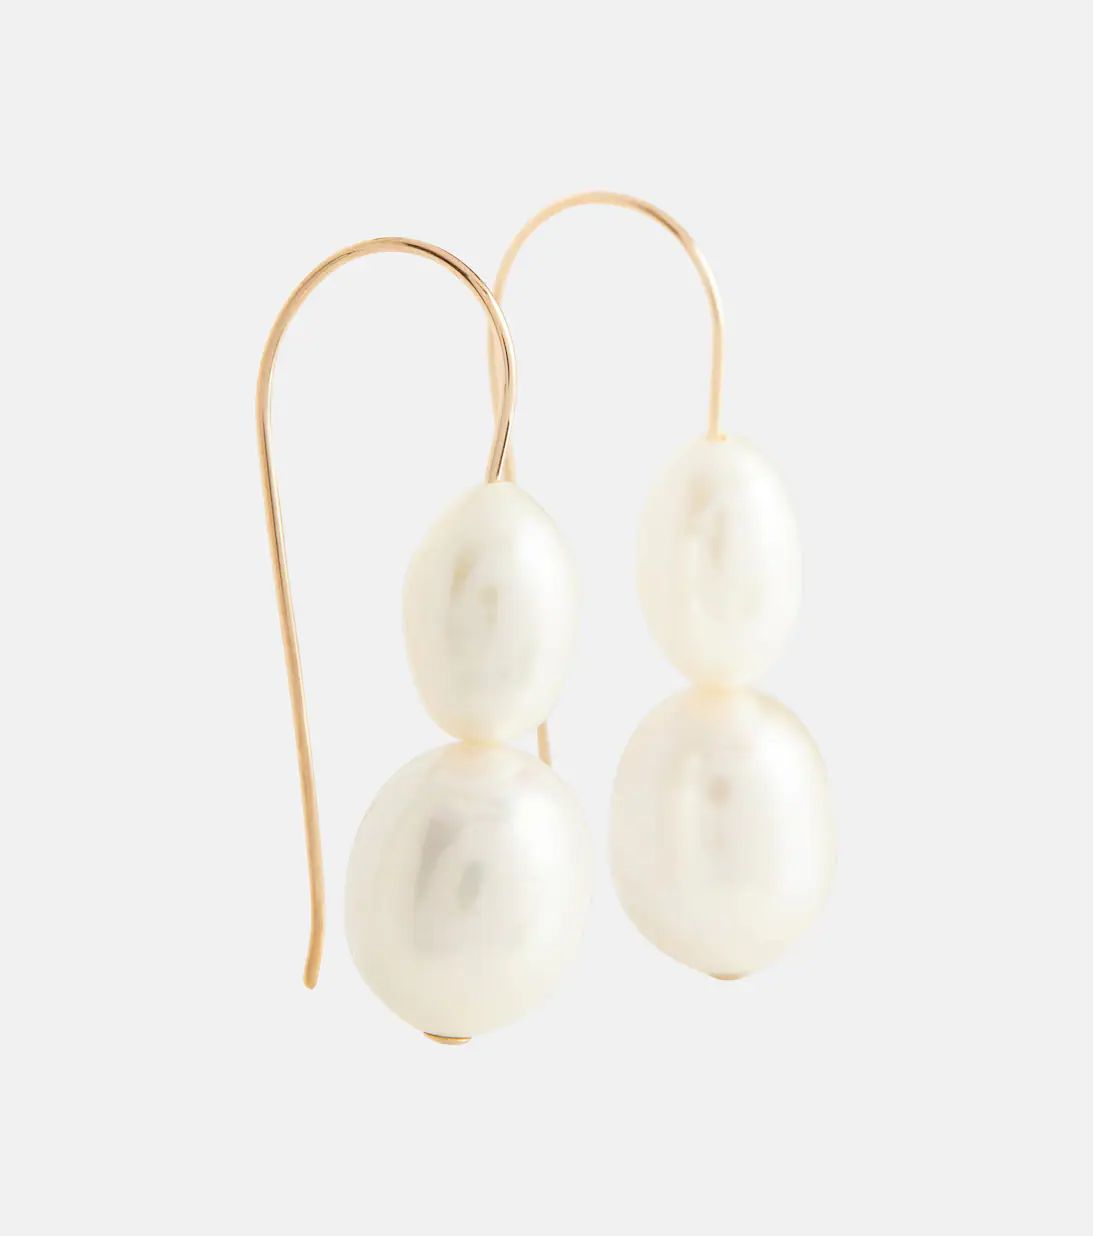 14kt gold earrings with pearls | Mytheresa (US/CA)